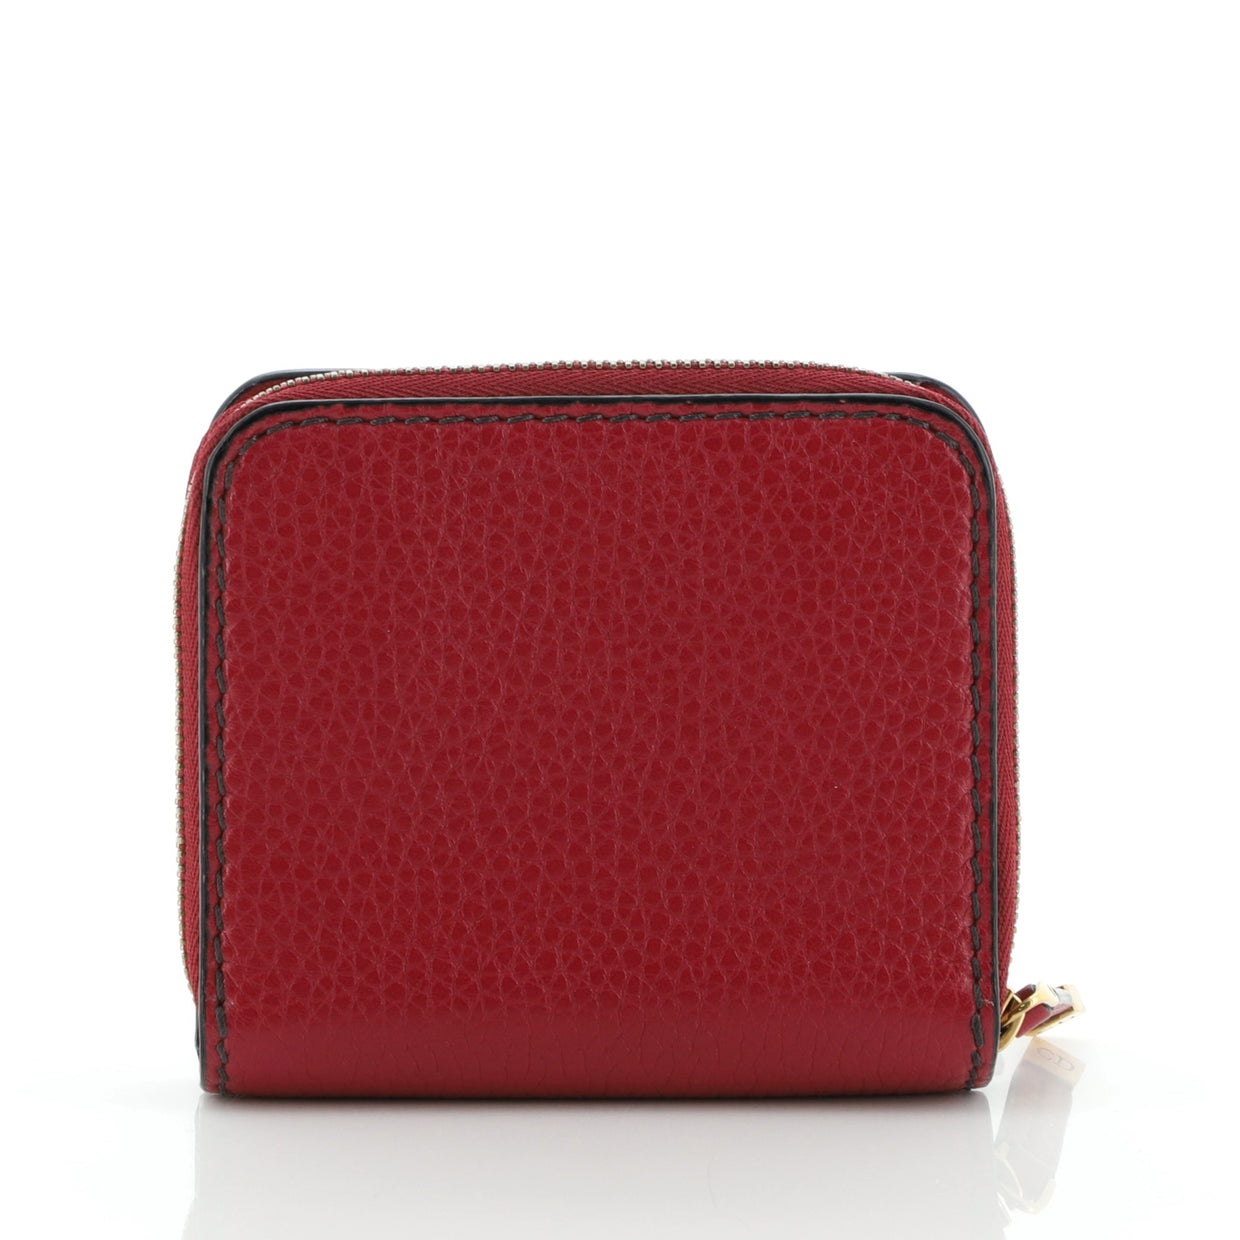 Christian Dior Bee Zip Wallet Leather Compact Red 58674268